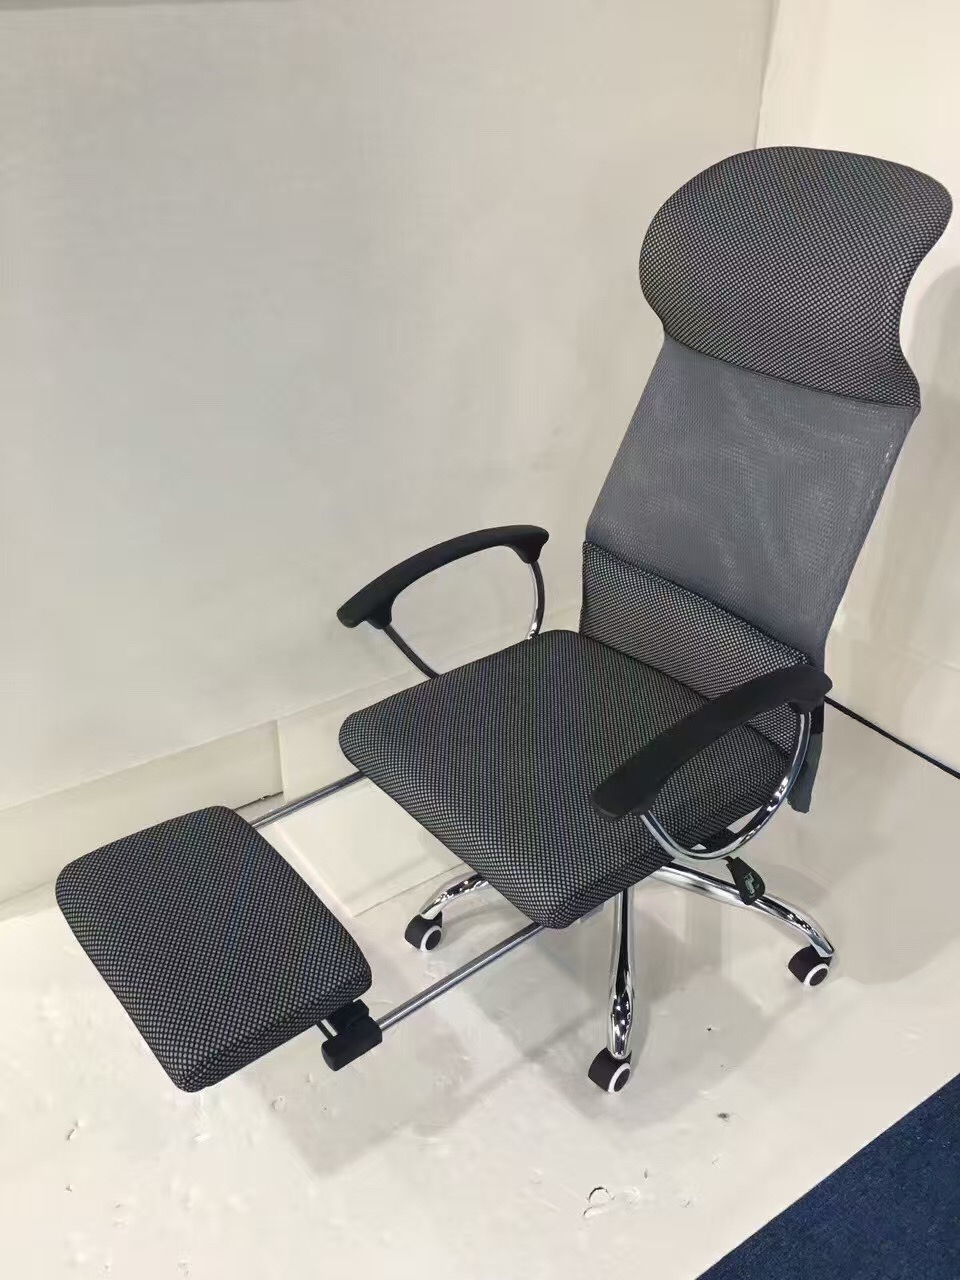 the nice design for the comfortable mesh computer office chair